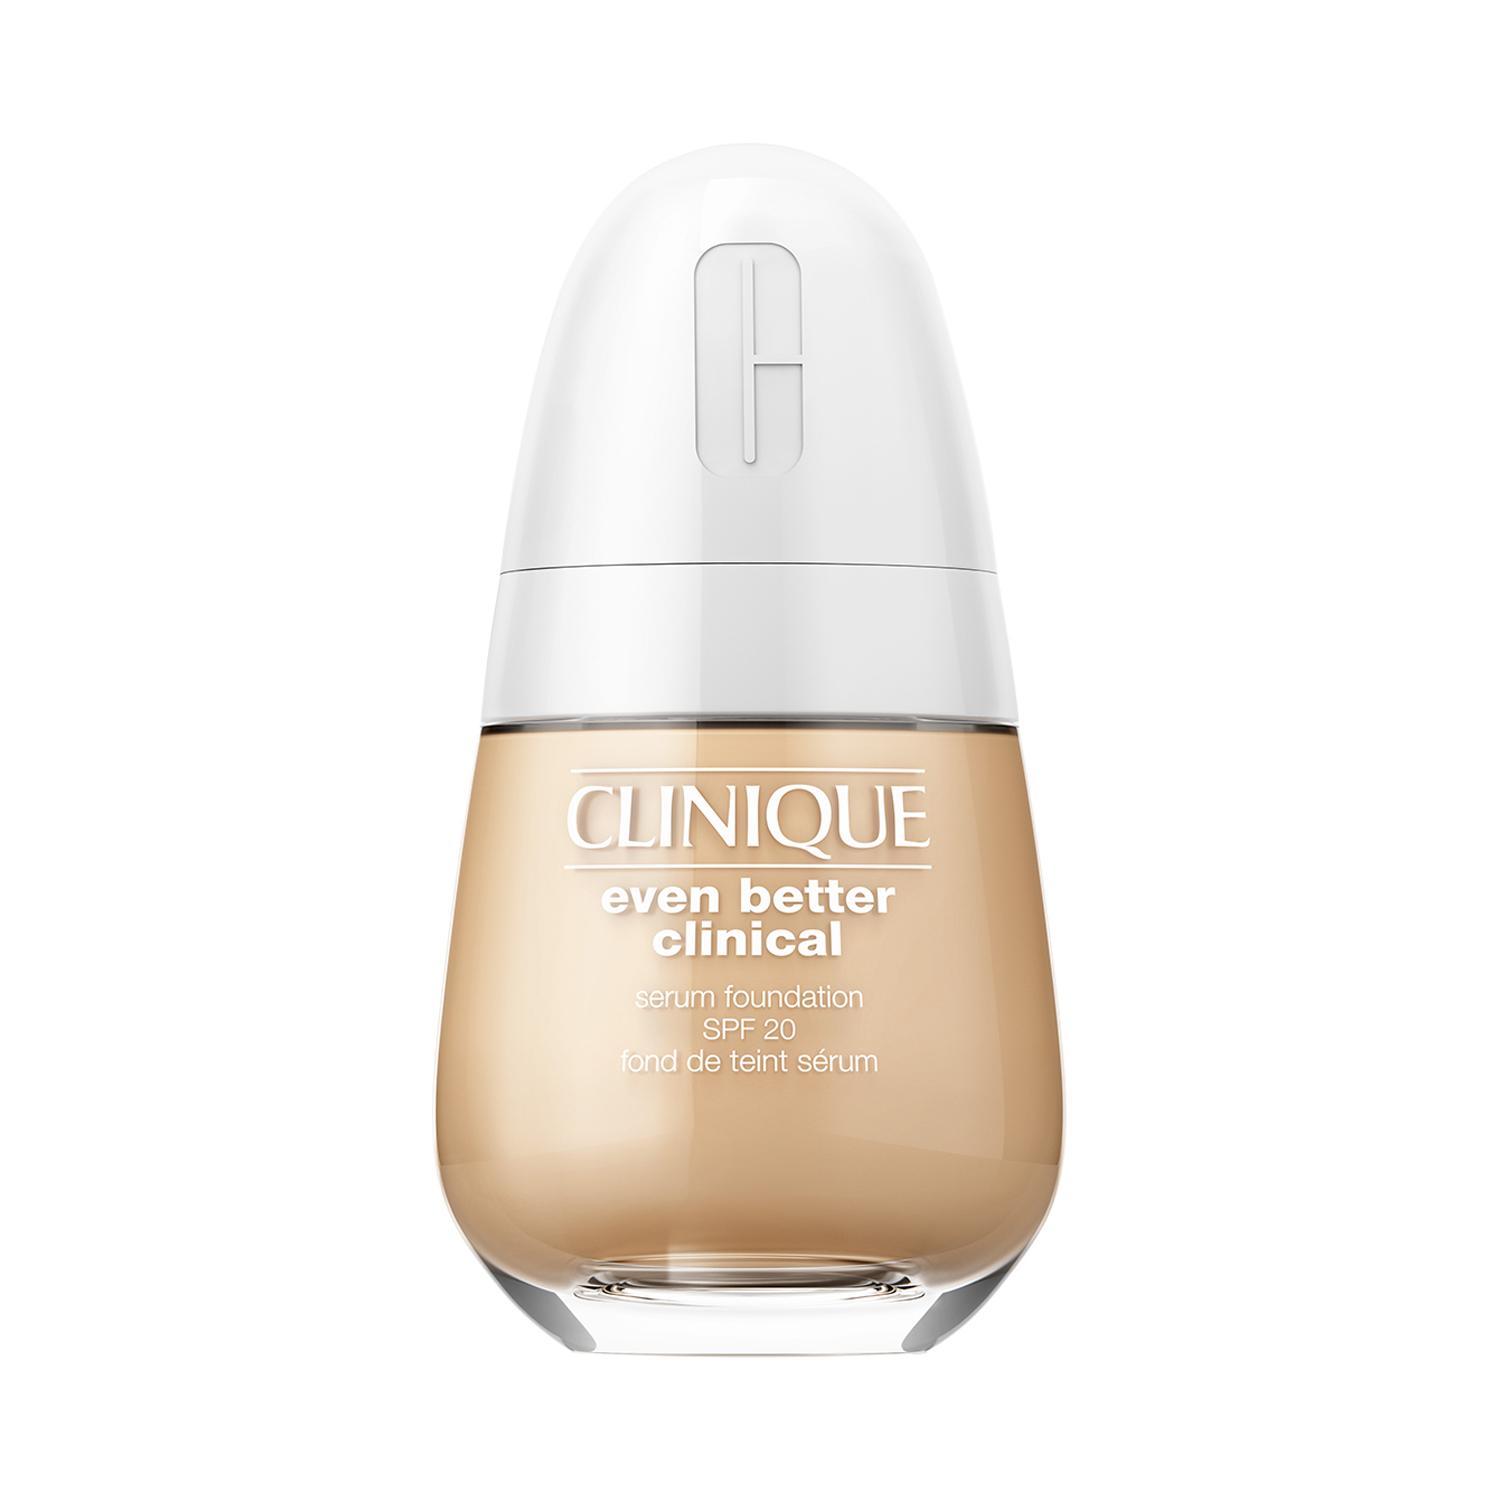 CLINIQUE Even Better Clinical Serum Foundation Broad Spectrum SPF 20 - WN 76 Toasted Wheat (30ml)